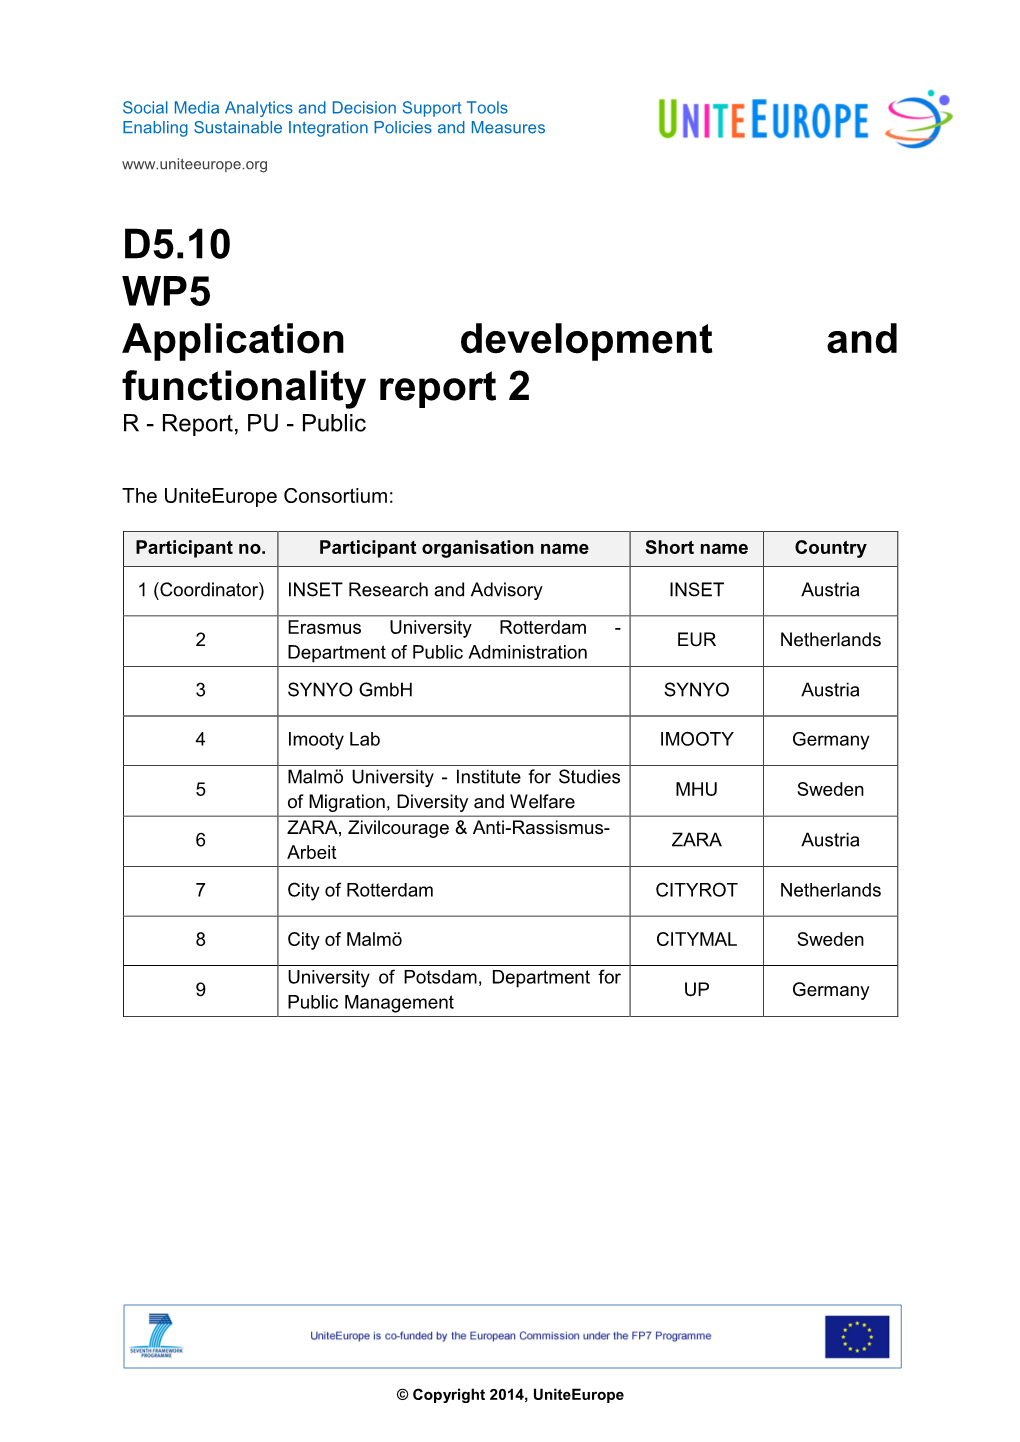 D5.10 WP5 Application Development and Functionality Report 2 R - Report, PU - Public